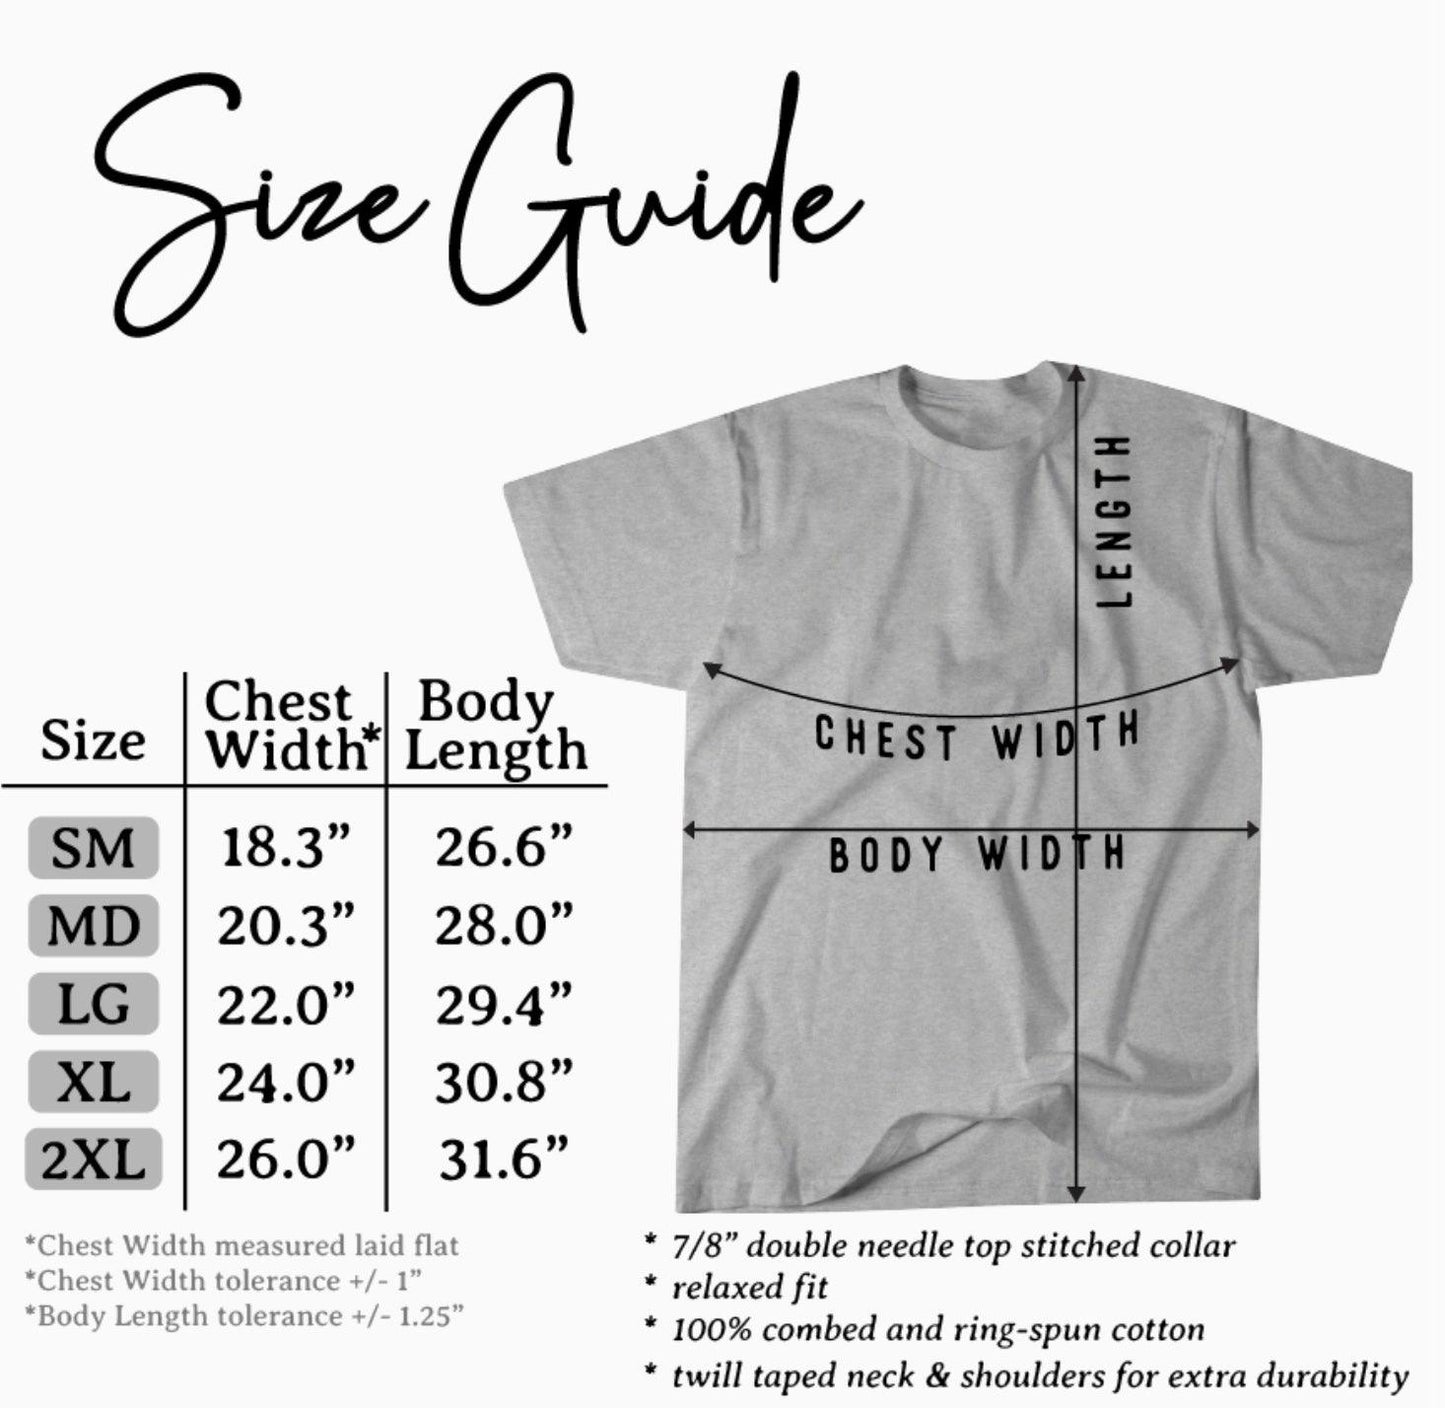 Comfort Colors Sizing Guide